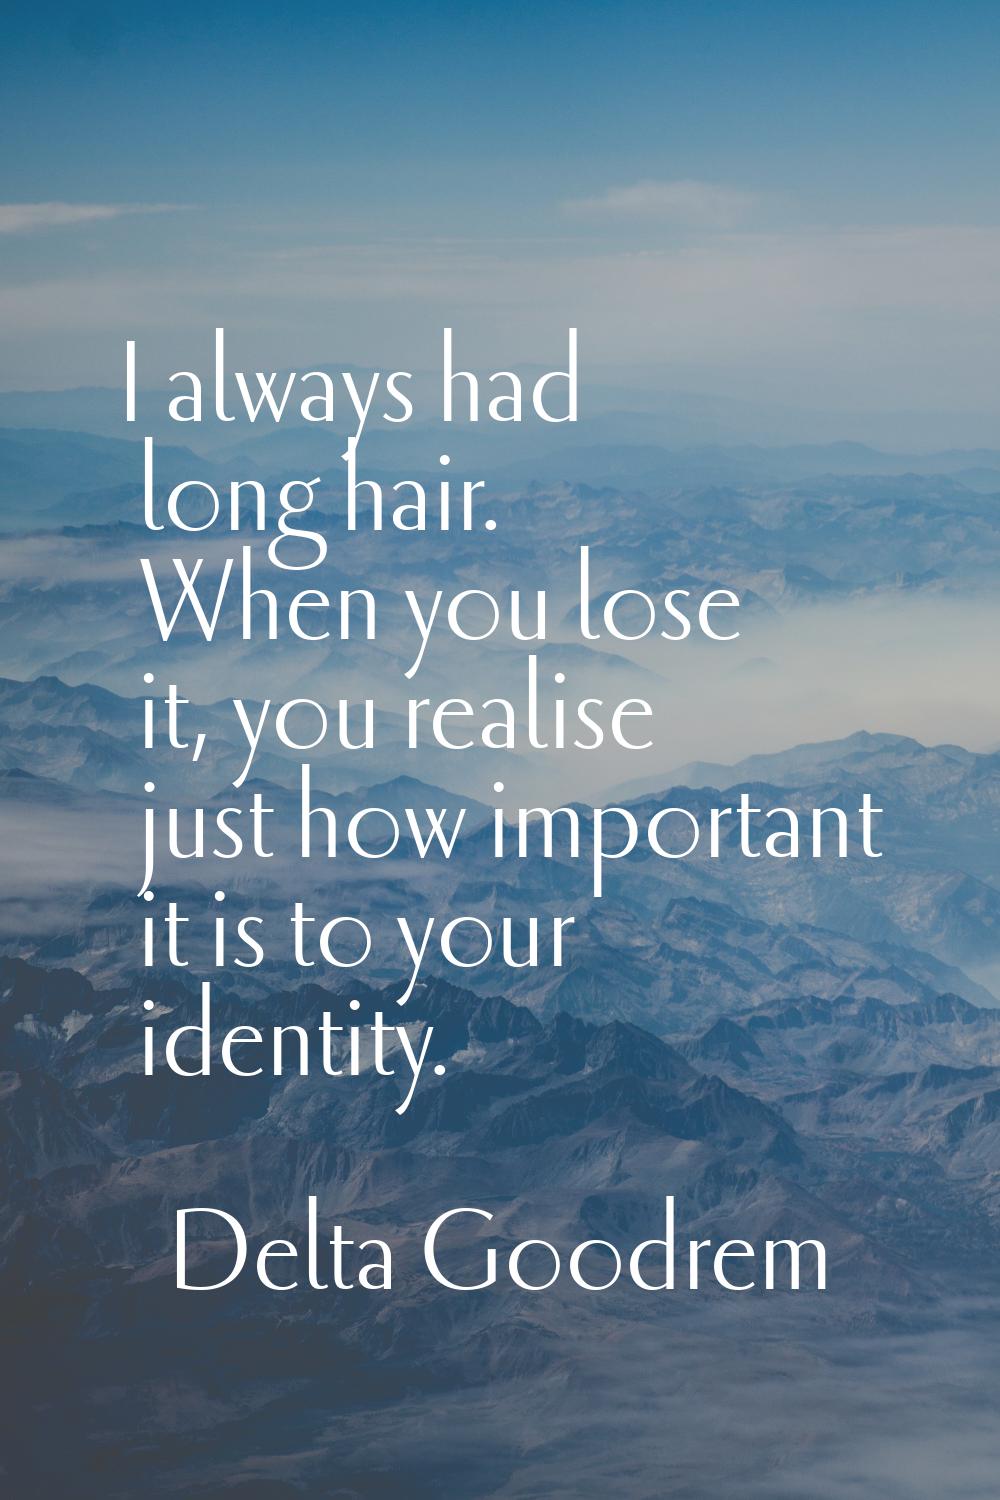 I always had long hair. When you lose it, you realise just how important it is to your identity.